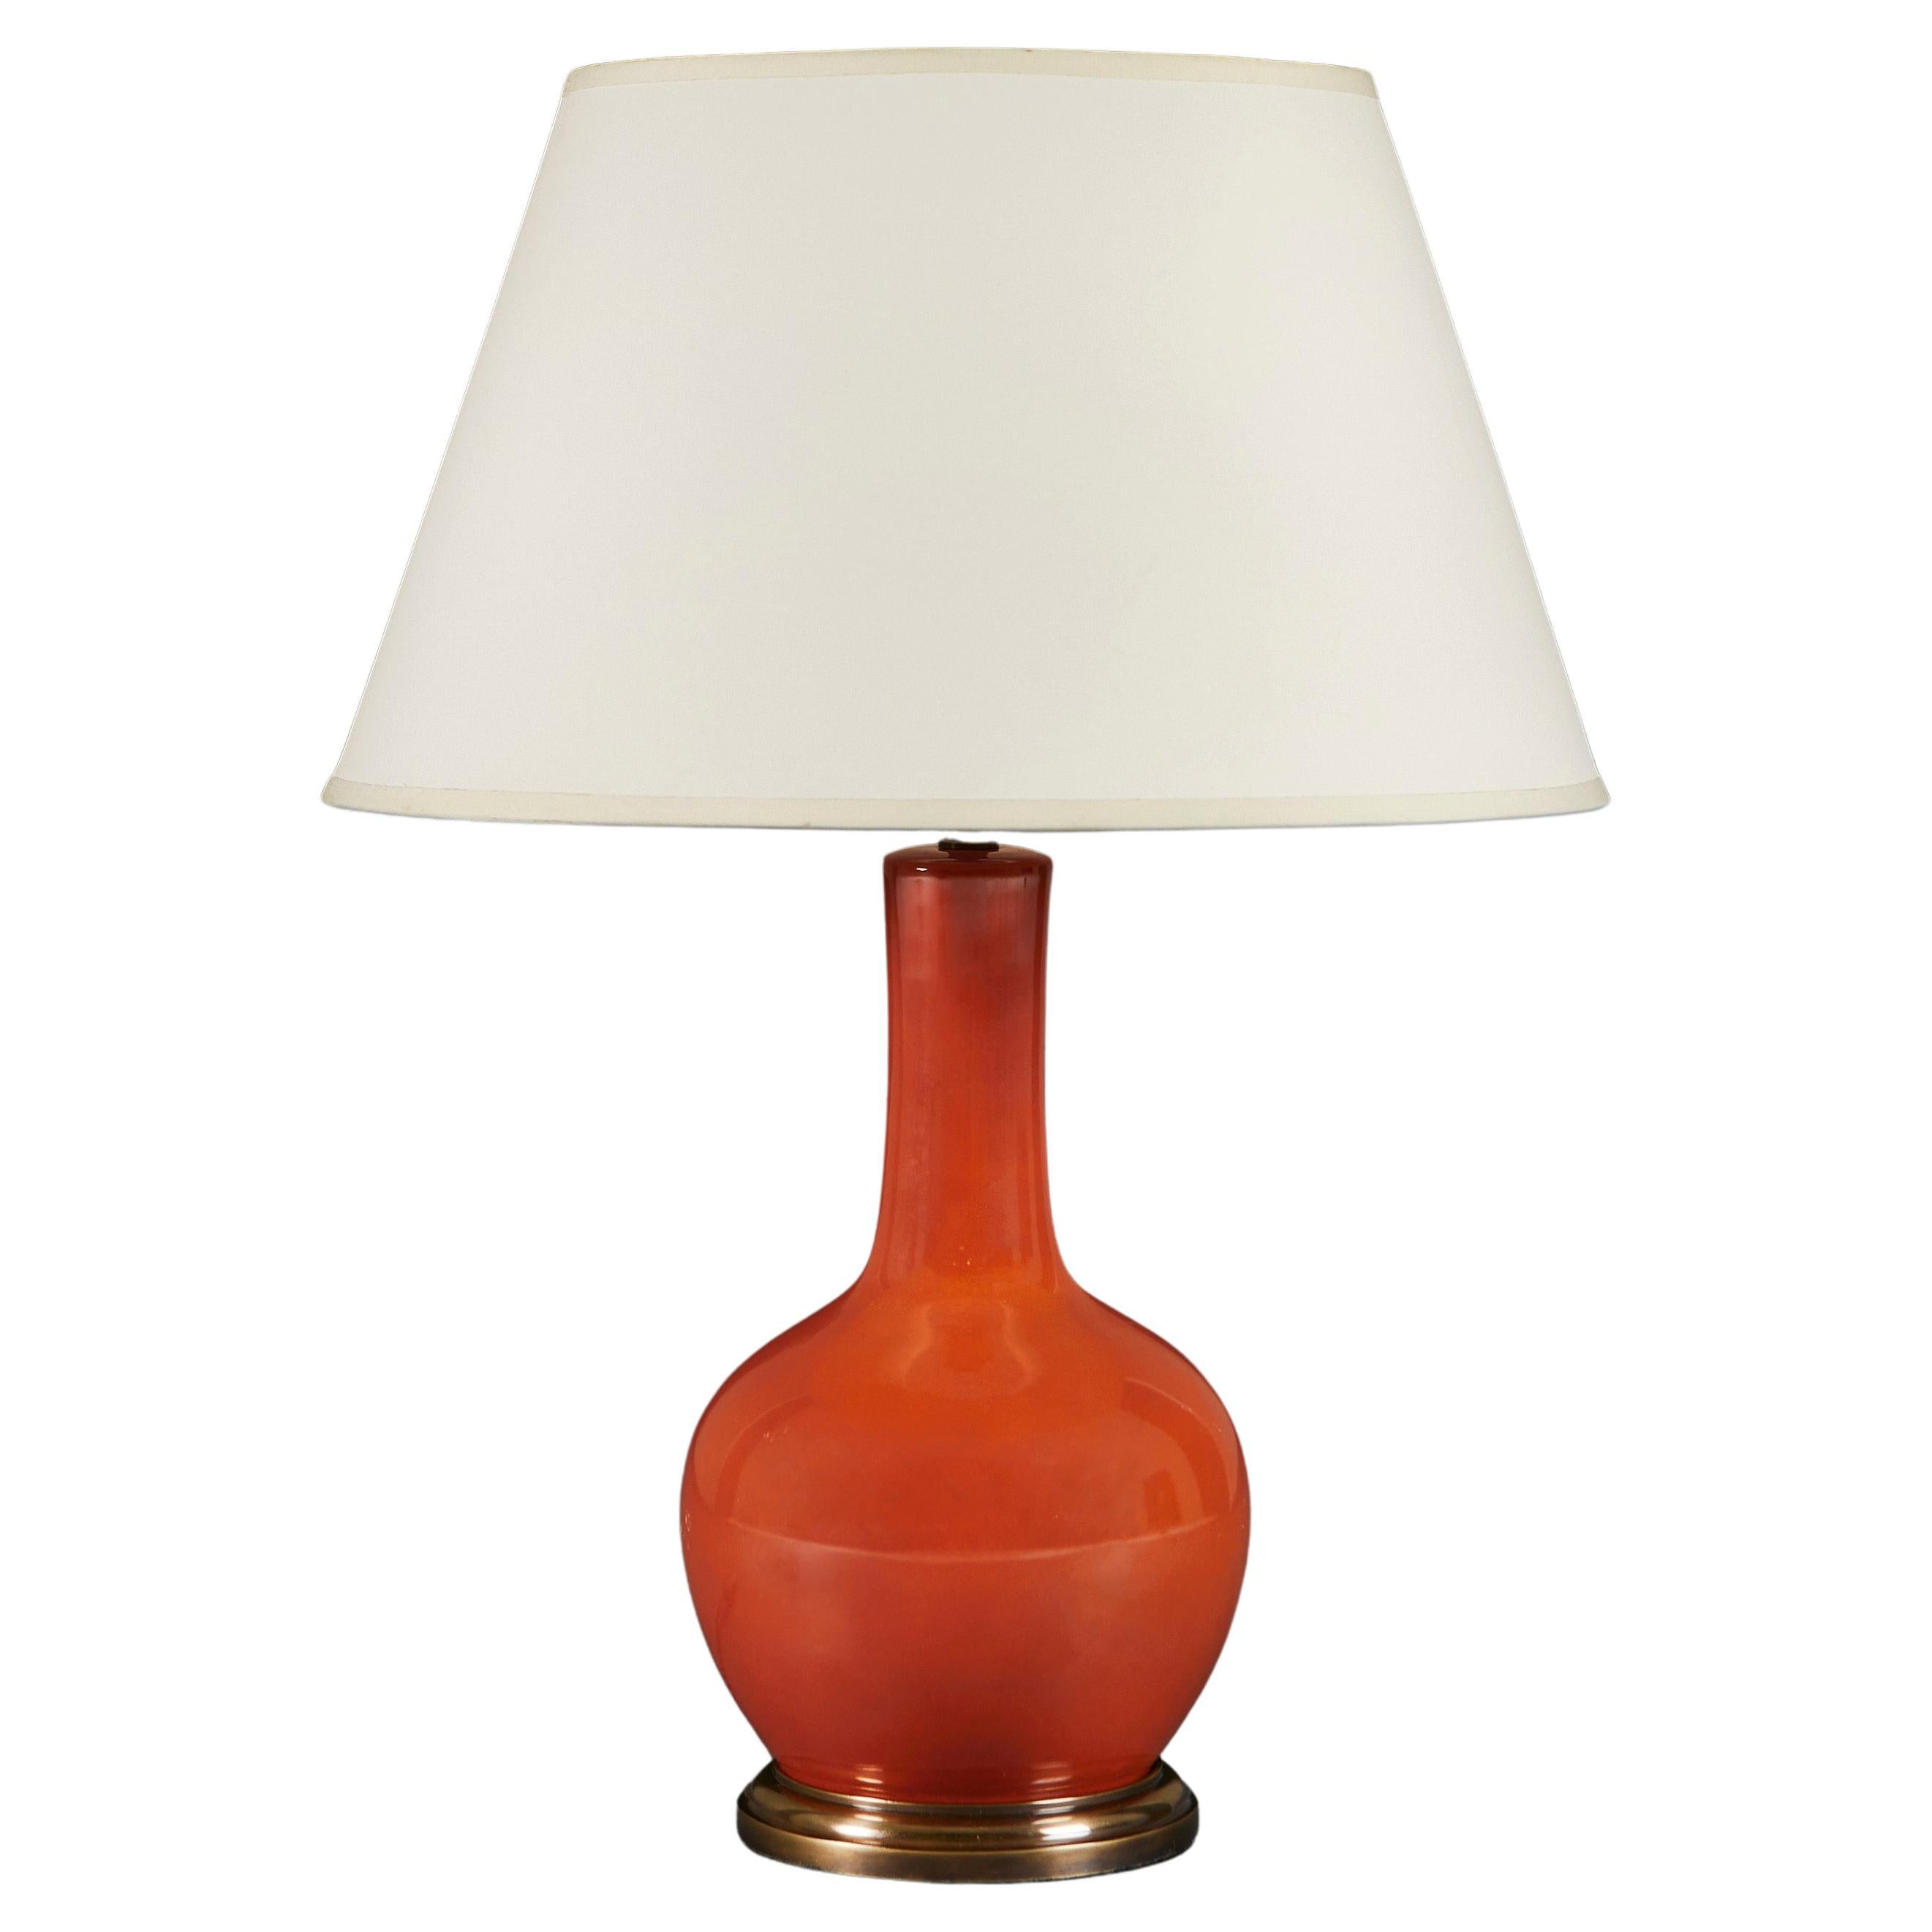 A Red Umber Monochrome Lamp